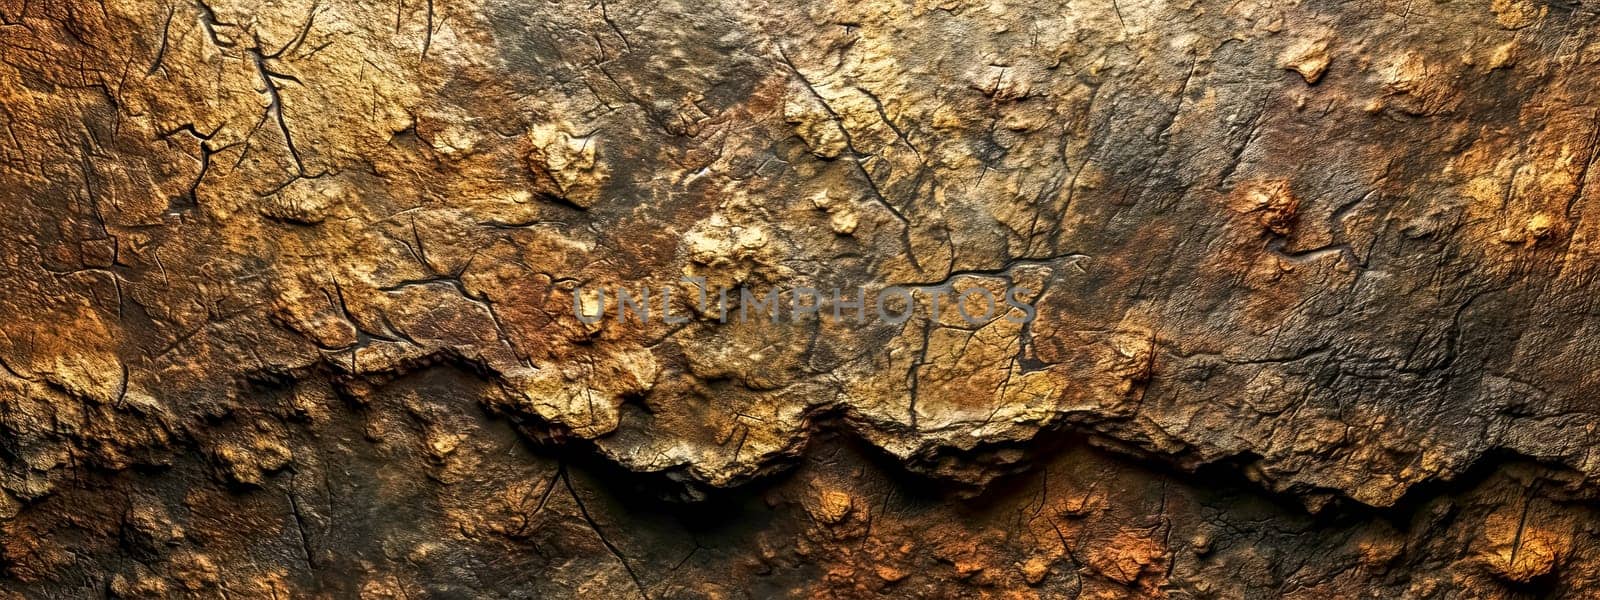 natural beauty and complexity of a rock surface, highlighted by the warm, golden lighting that accentuates its rugged texture and the deep crevices that run through it.